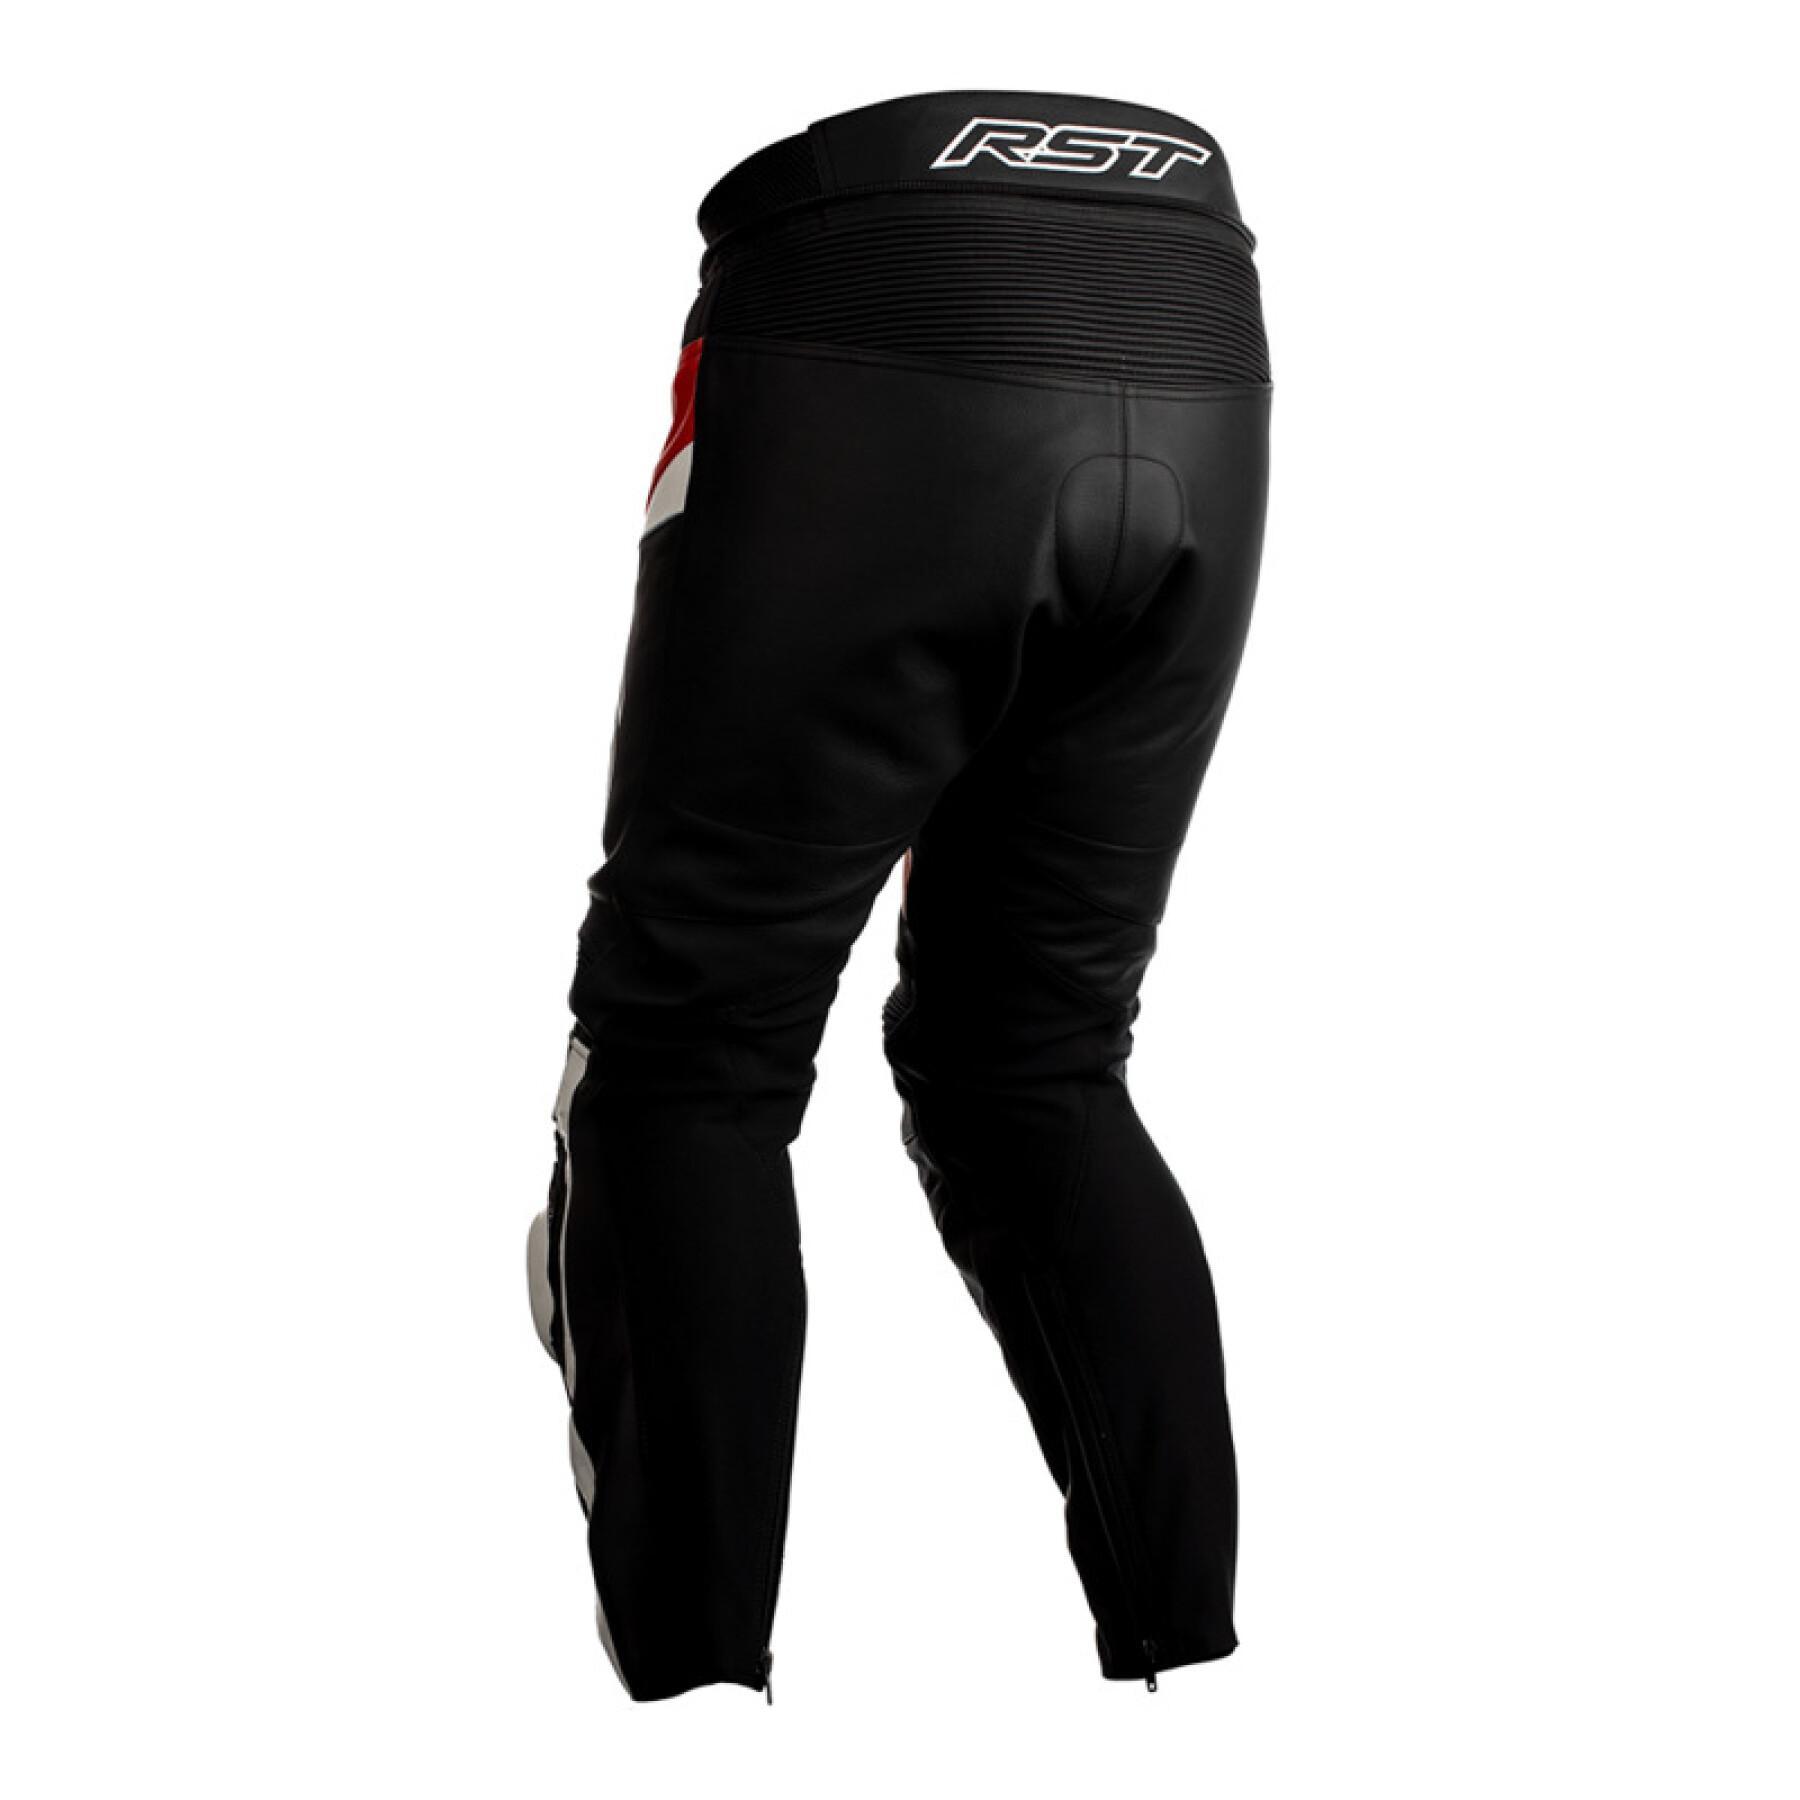 Leather motorcycle pants RST Tractech Evo 8 CE